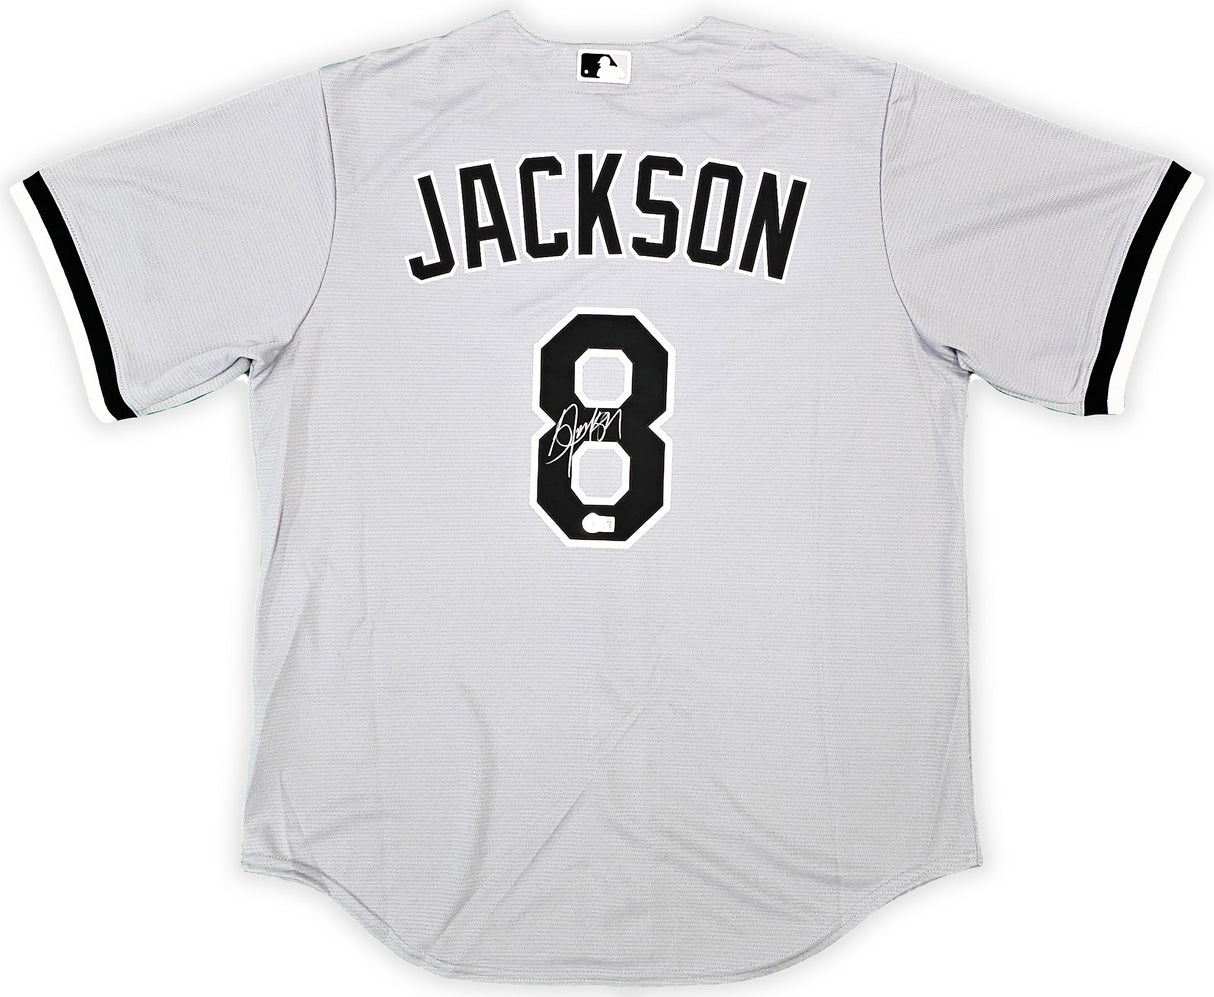 Chicago White Sox Bo Jackson Autographed Gray Nike Jersey Size L Beckett BAS Witness Stock #218038